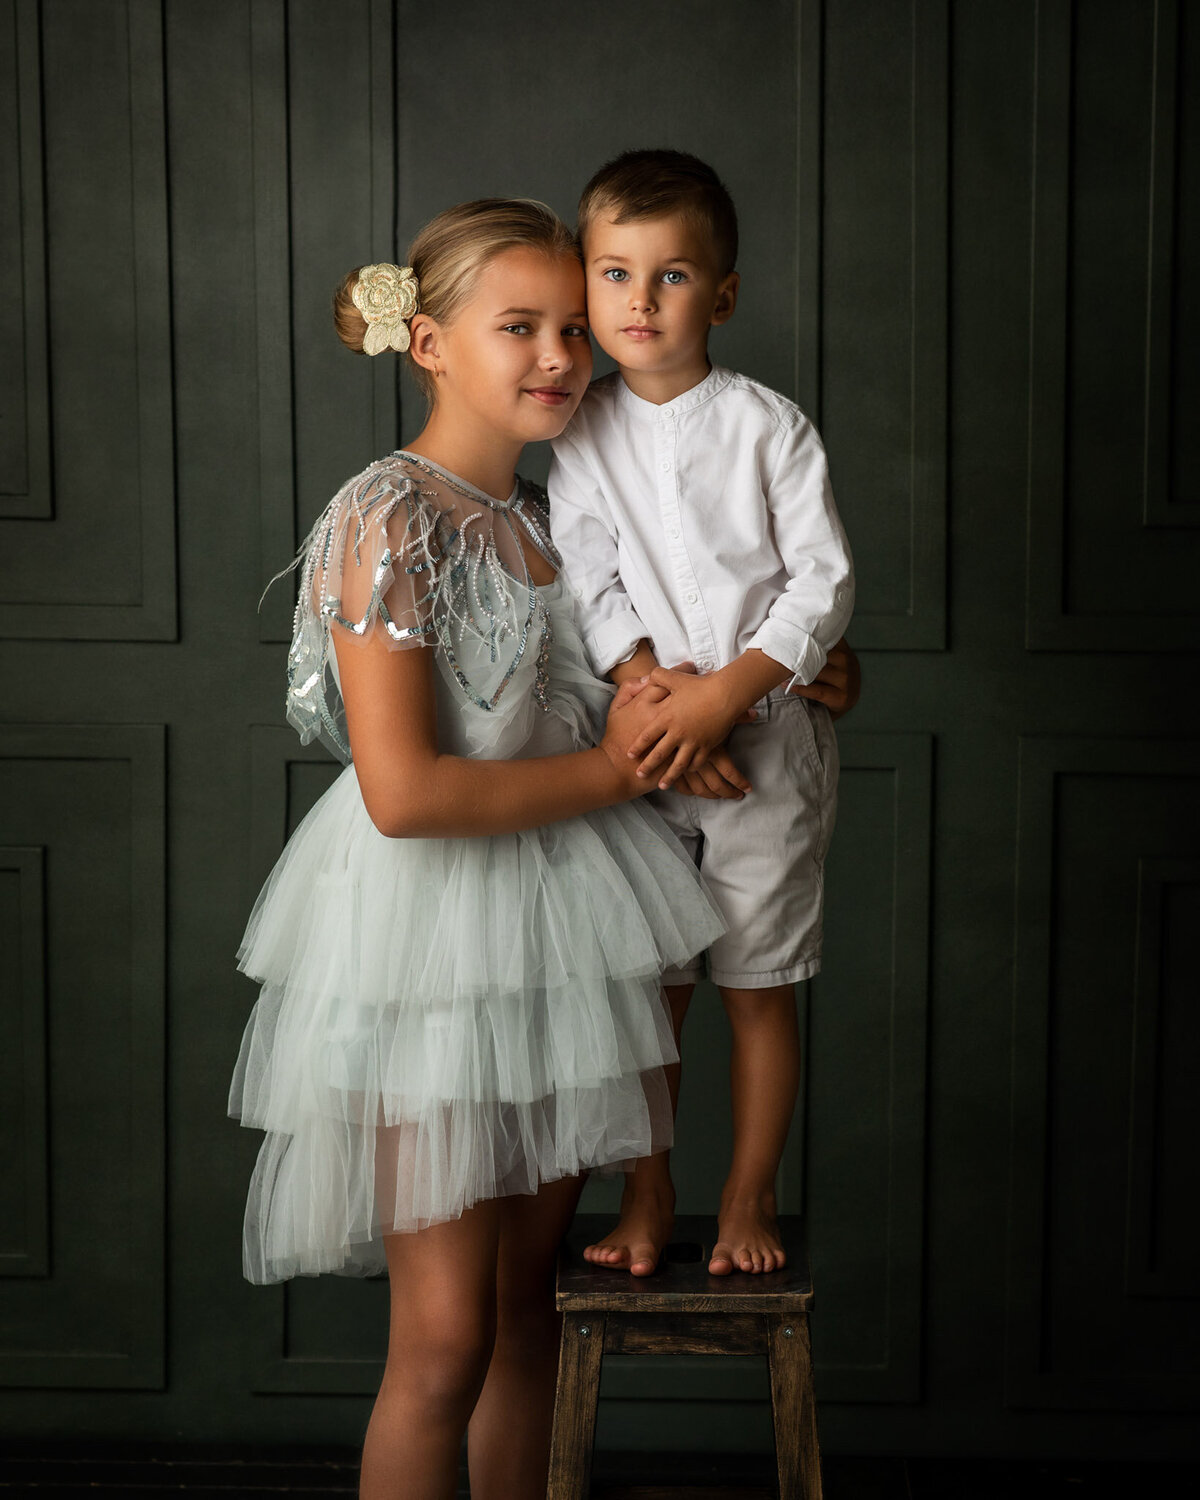 Brother and sister sharing a moment posing at RS Portrait Photography studio in London, Beckenham